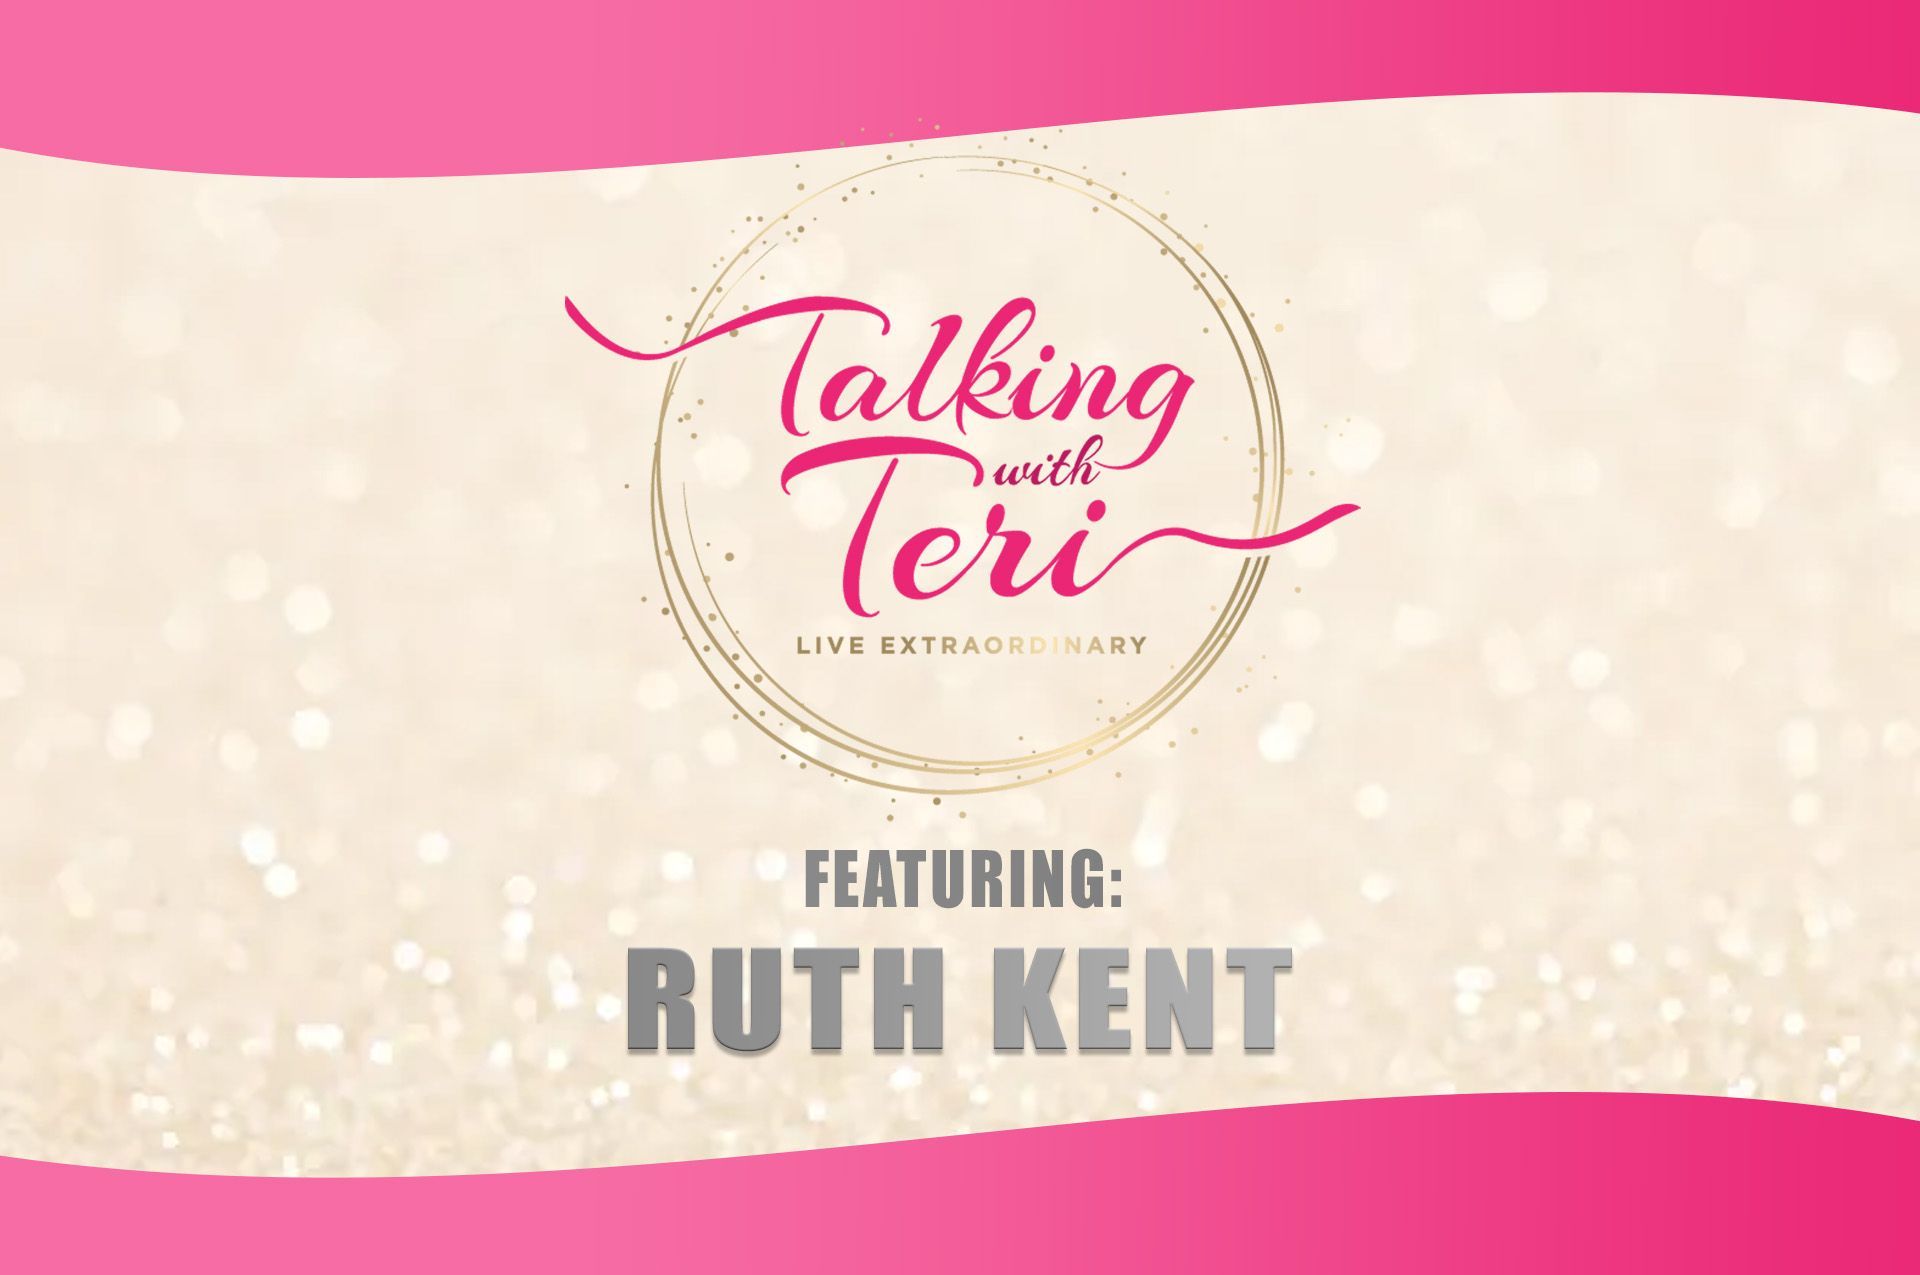 How to Discover a Life filled with Joy and Freedom with Ruth Kent